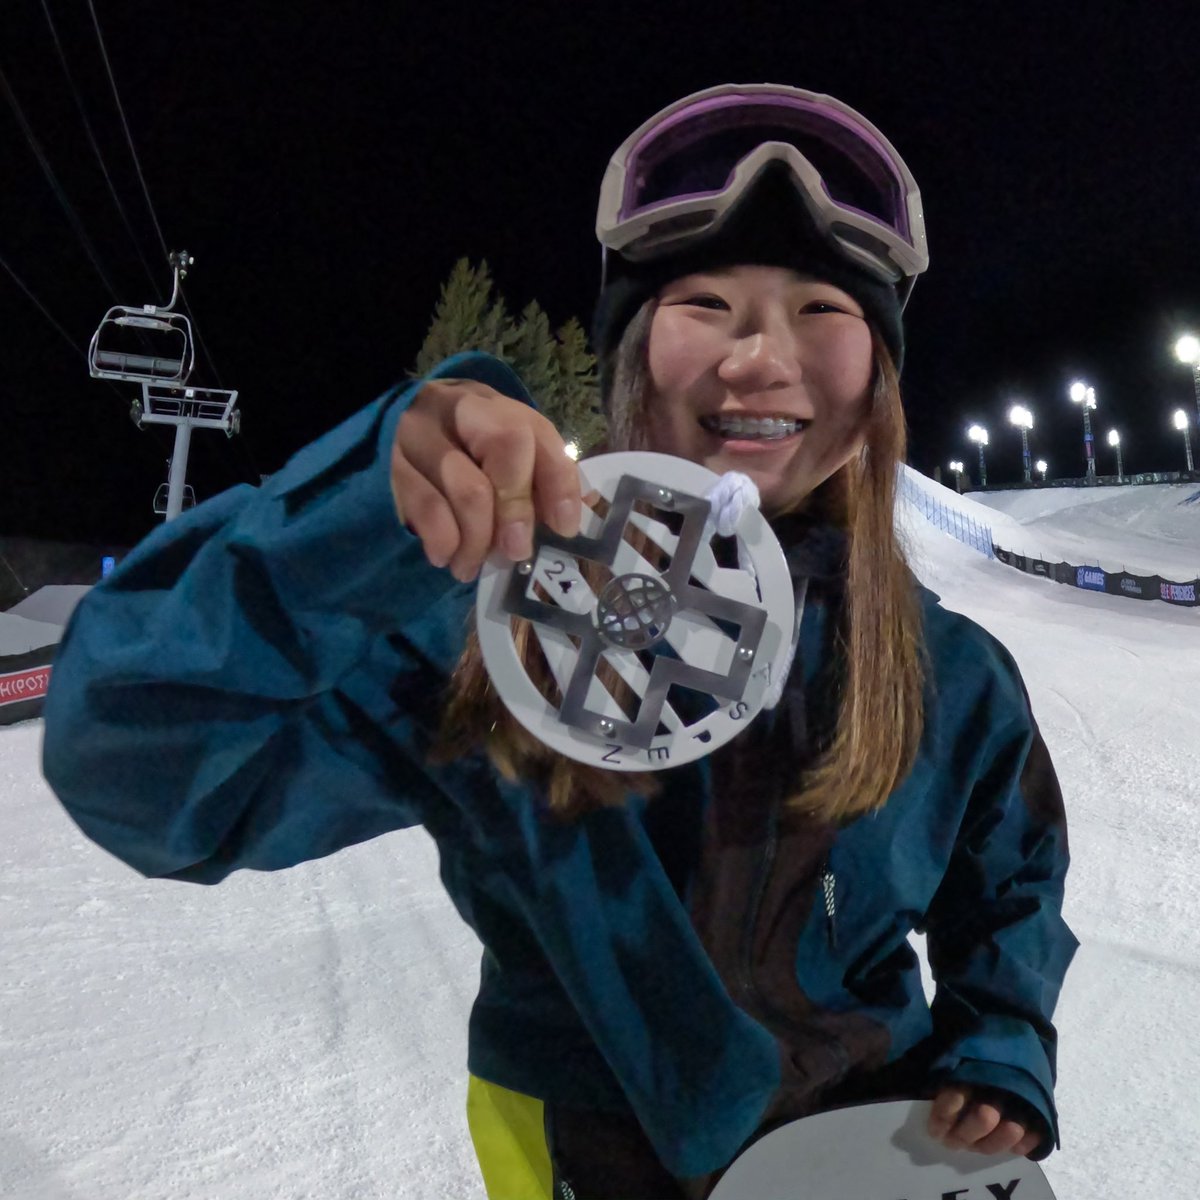 Another @XGames medal for #GoProAthlete @Leila_4121 at #XGamesAspen! This time taking home silver for Women's Snowboard Big Air 🔥